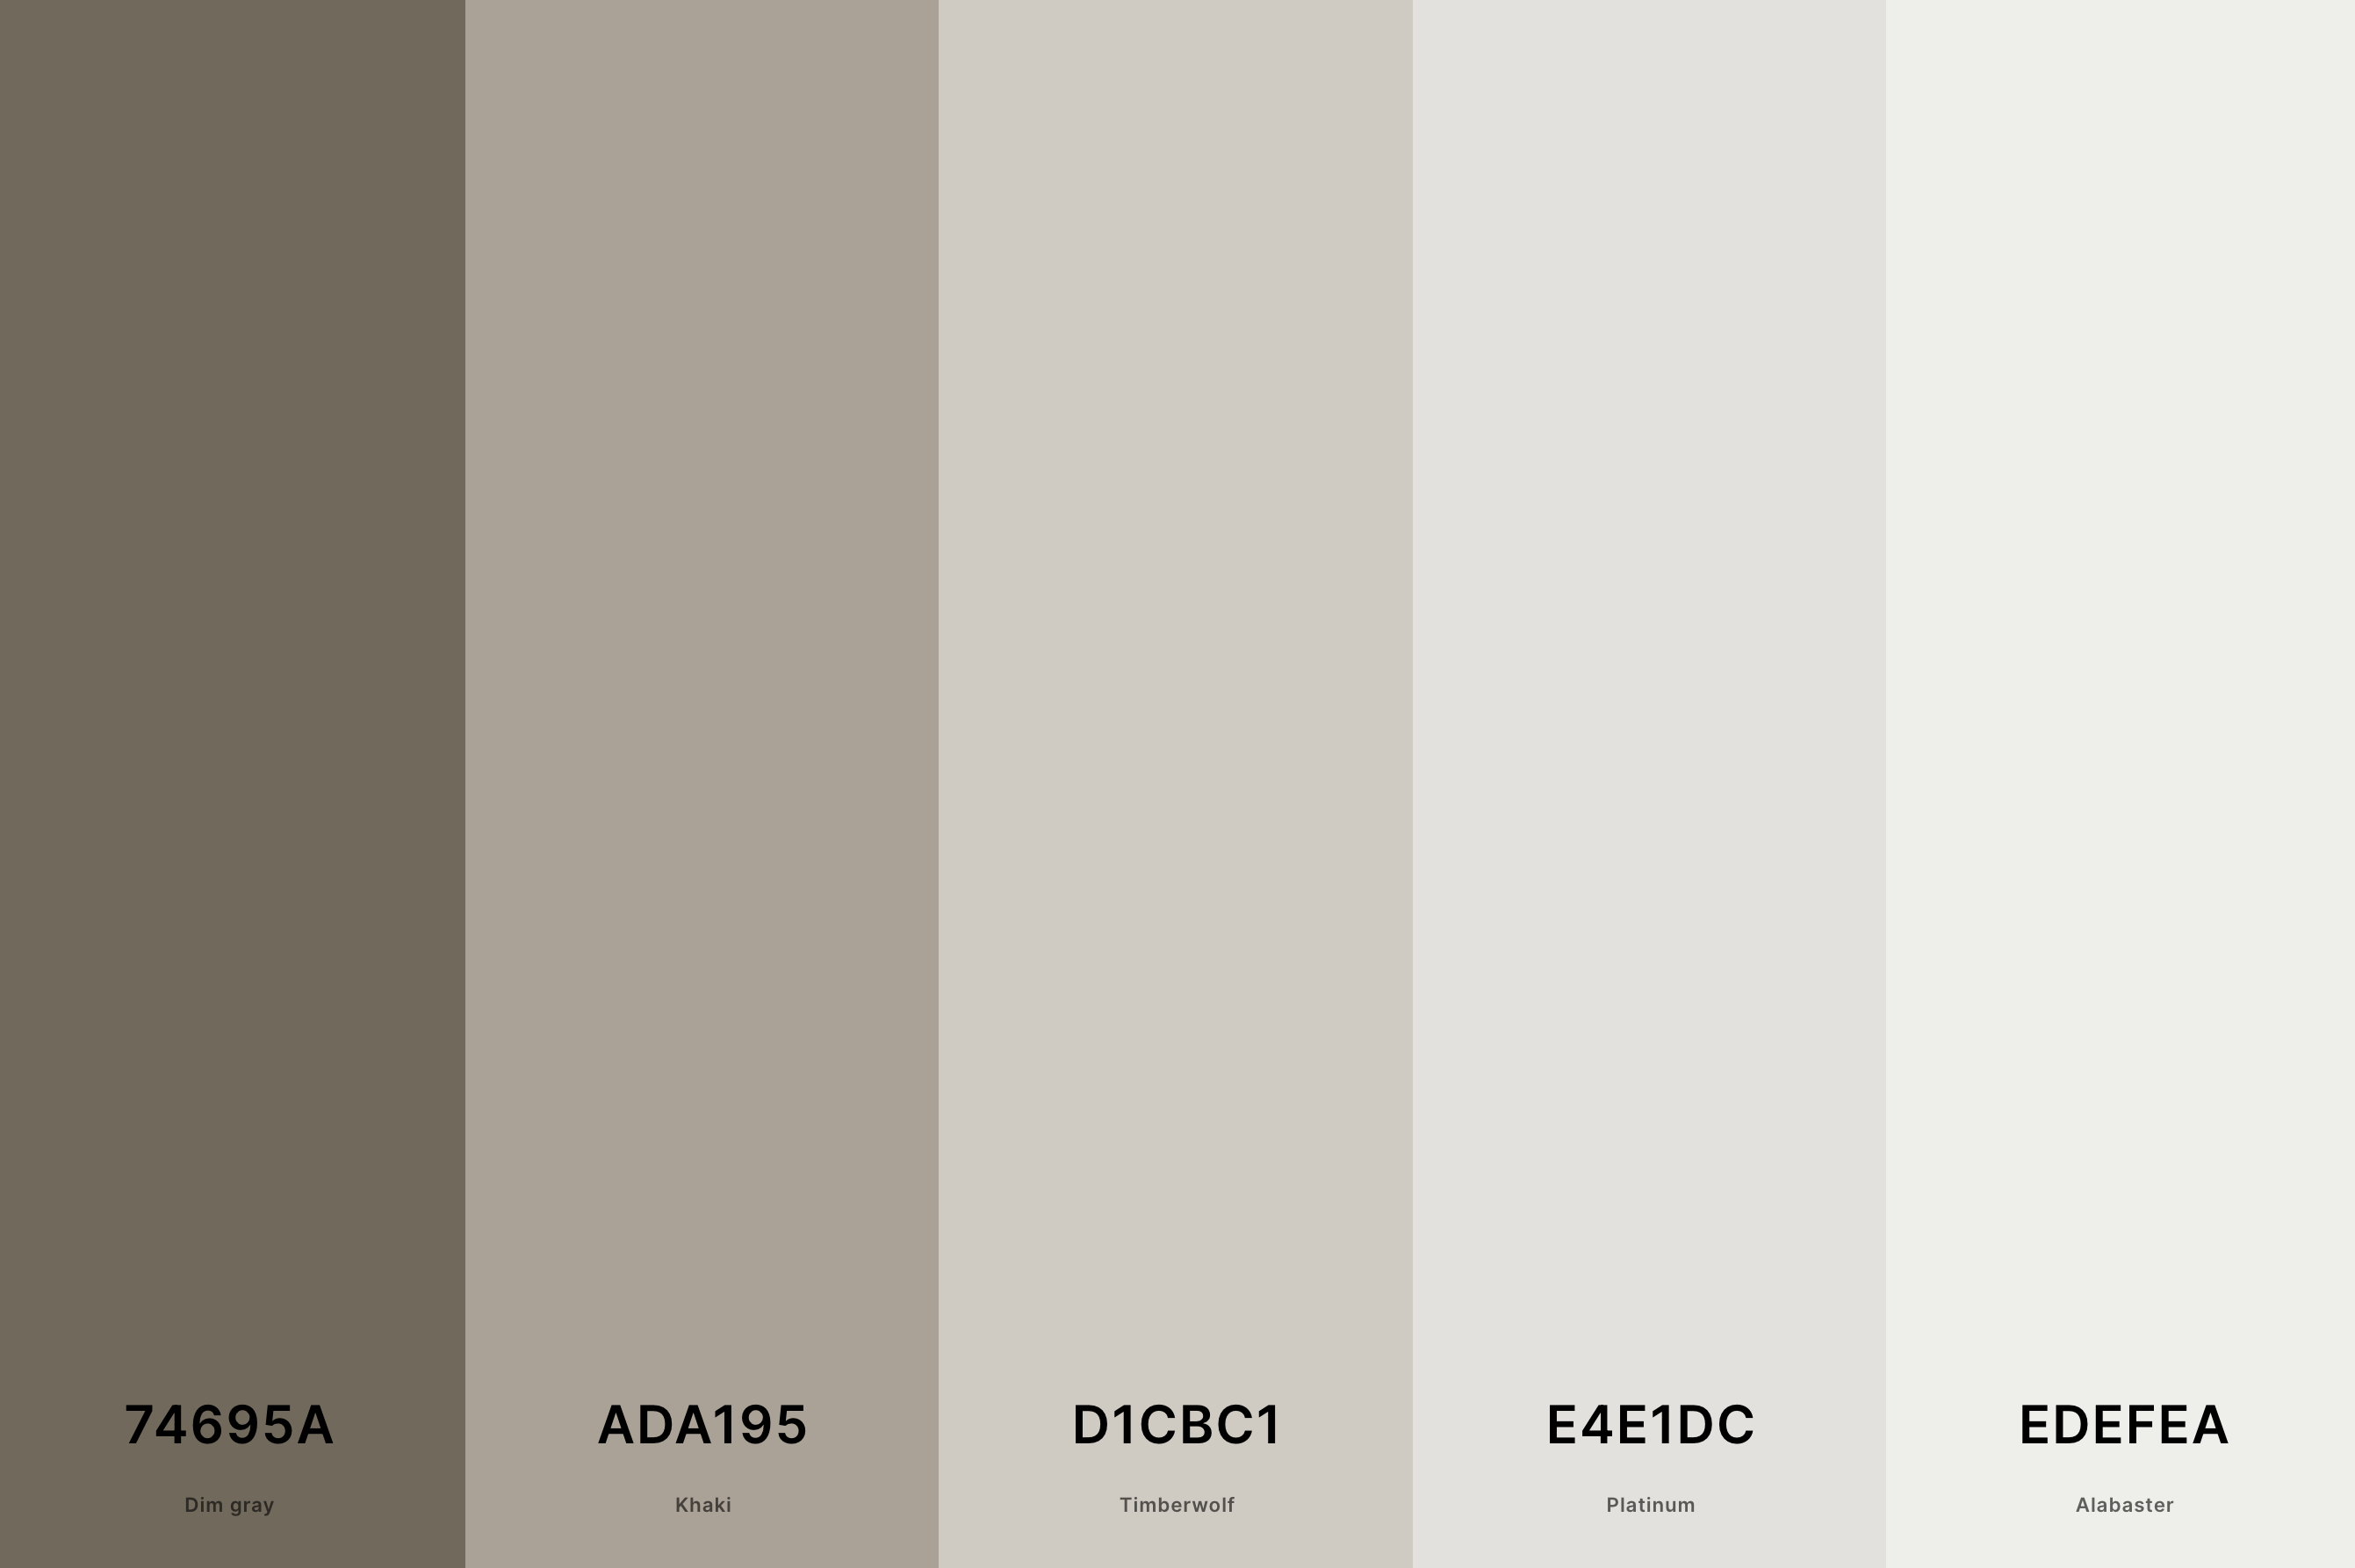 2. Agreeable Gray Color Palette Color Palette with Dim Gray (Hex #74695A) + Khaki (Hex #ADA195) + Timberwolf (Agreeable Gray) (Hex #D1CBC1) + Platinum (Hex #E4E1DC) + Alabaster (Hex #EDEFEA) Color Palette with Hex Codes